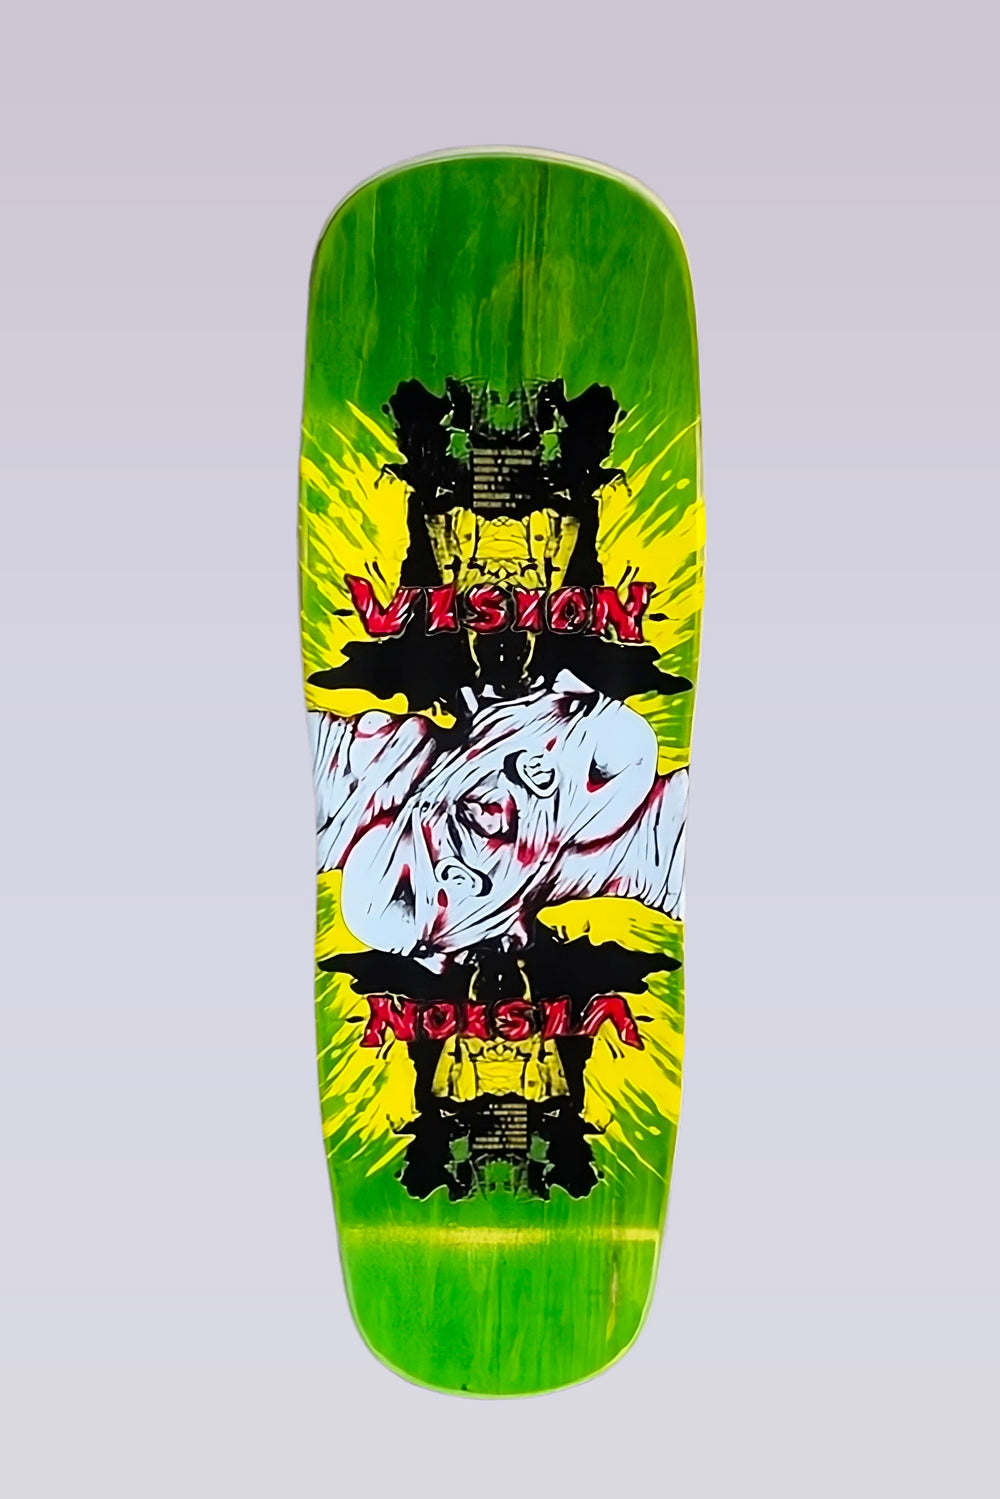 Double Vision Skateboard Deck - 9.5"X32.5" - Lime Stain